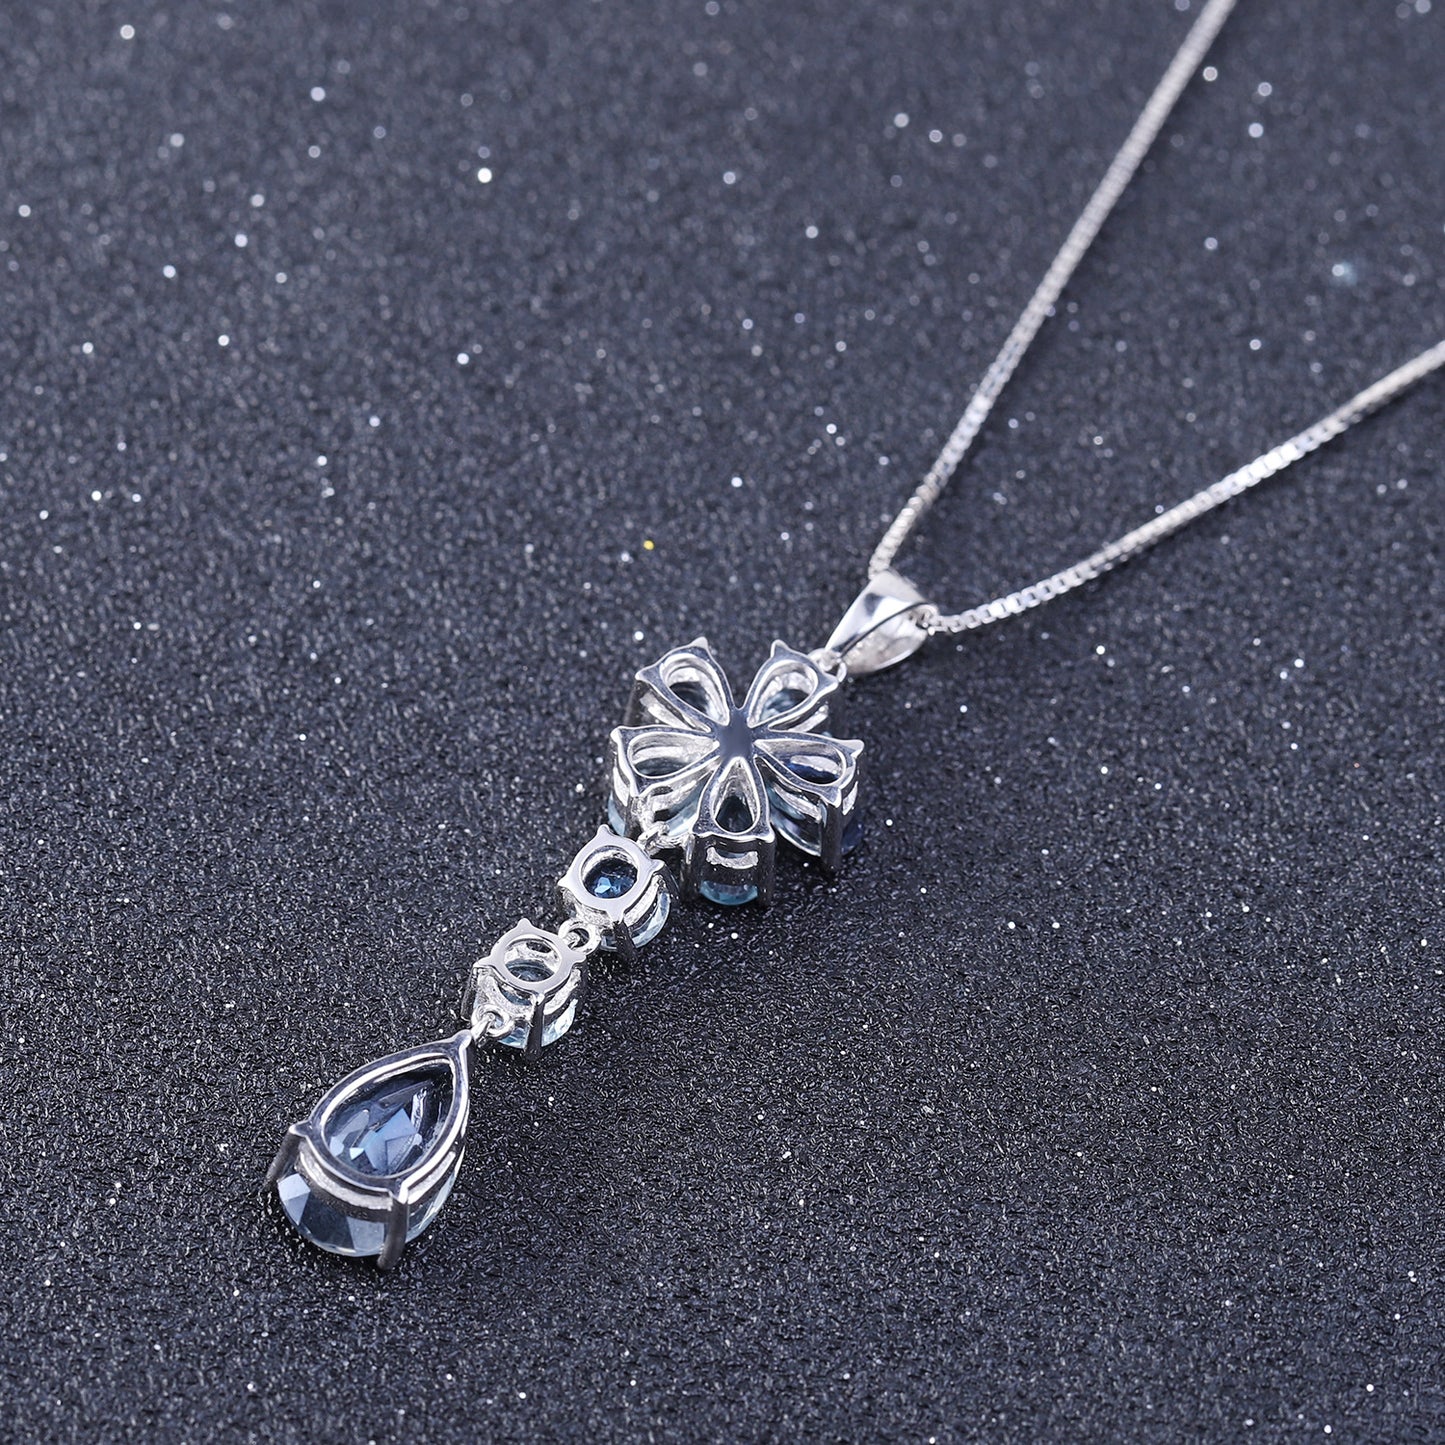 Luxury Style Inlaid Natural Topaz Pendant Sterling Silver Necklace for Women